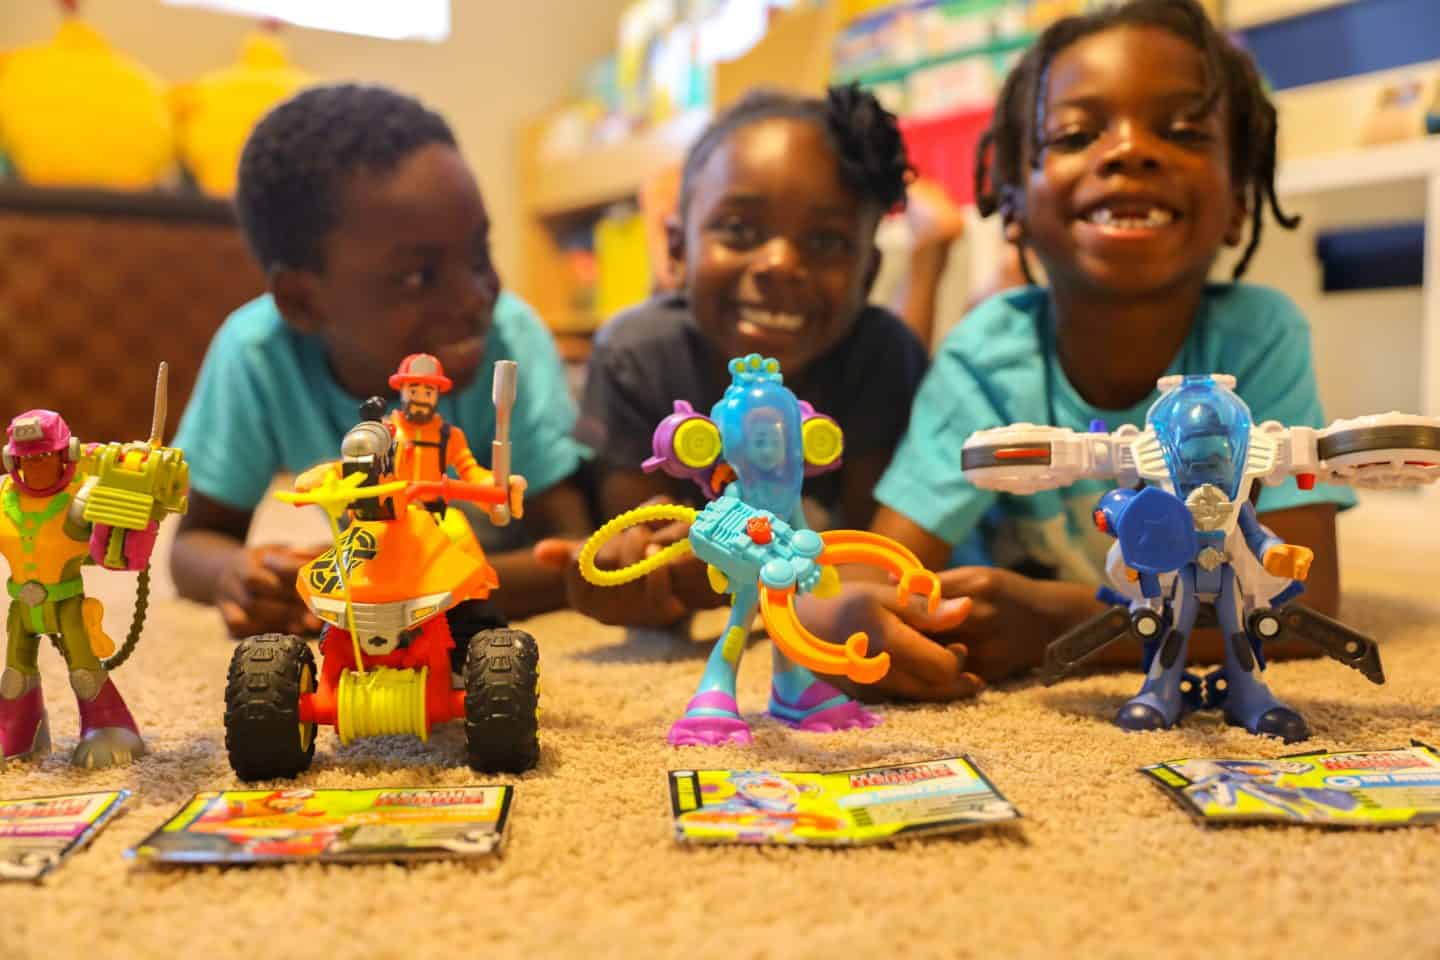 Buy Diverse Toys For Your Children | How To Be Anti-Racist